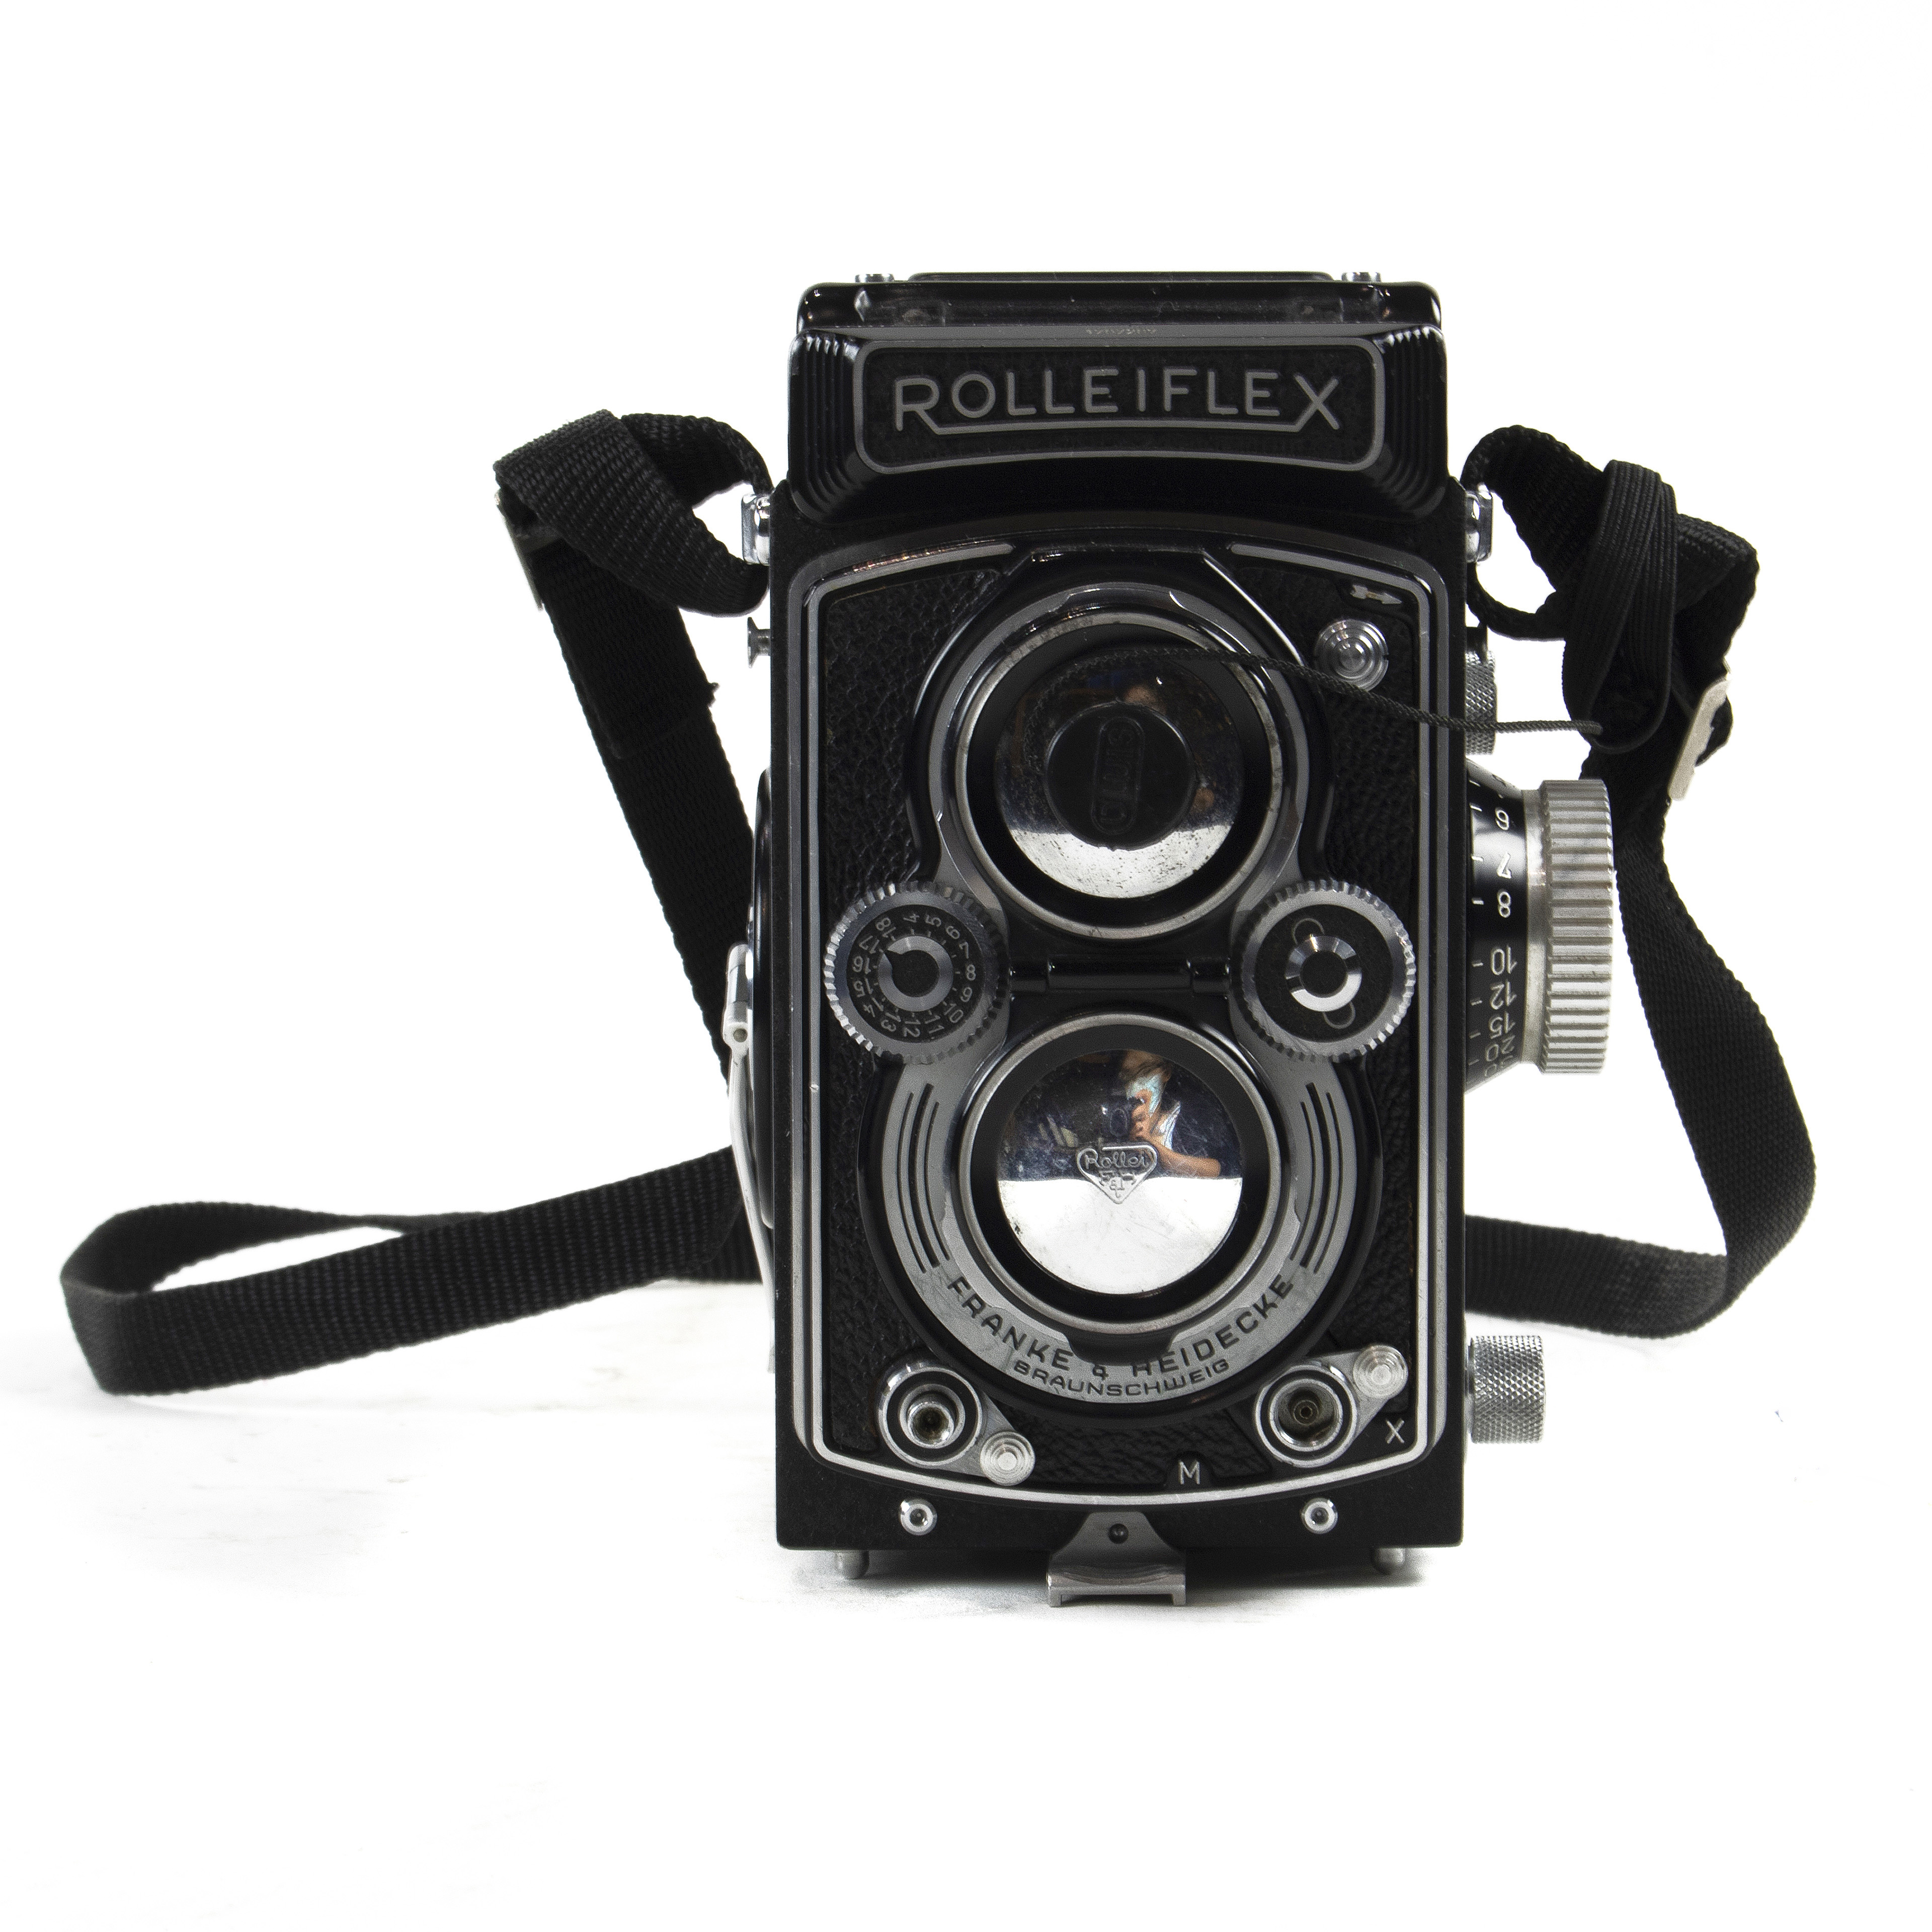 ROLLEIFLEX1:3.5F TLR CAMERA WITH